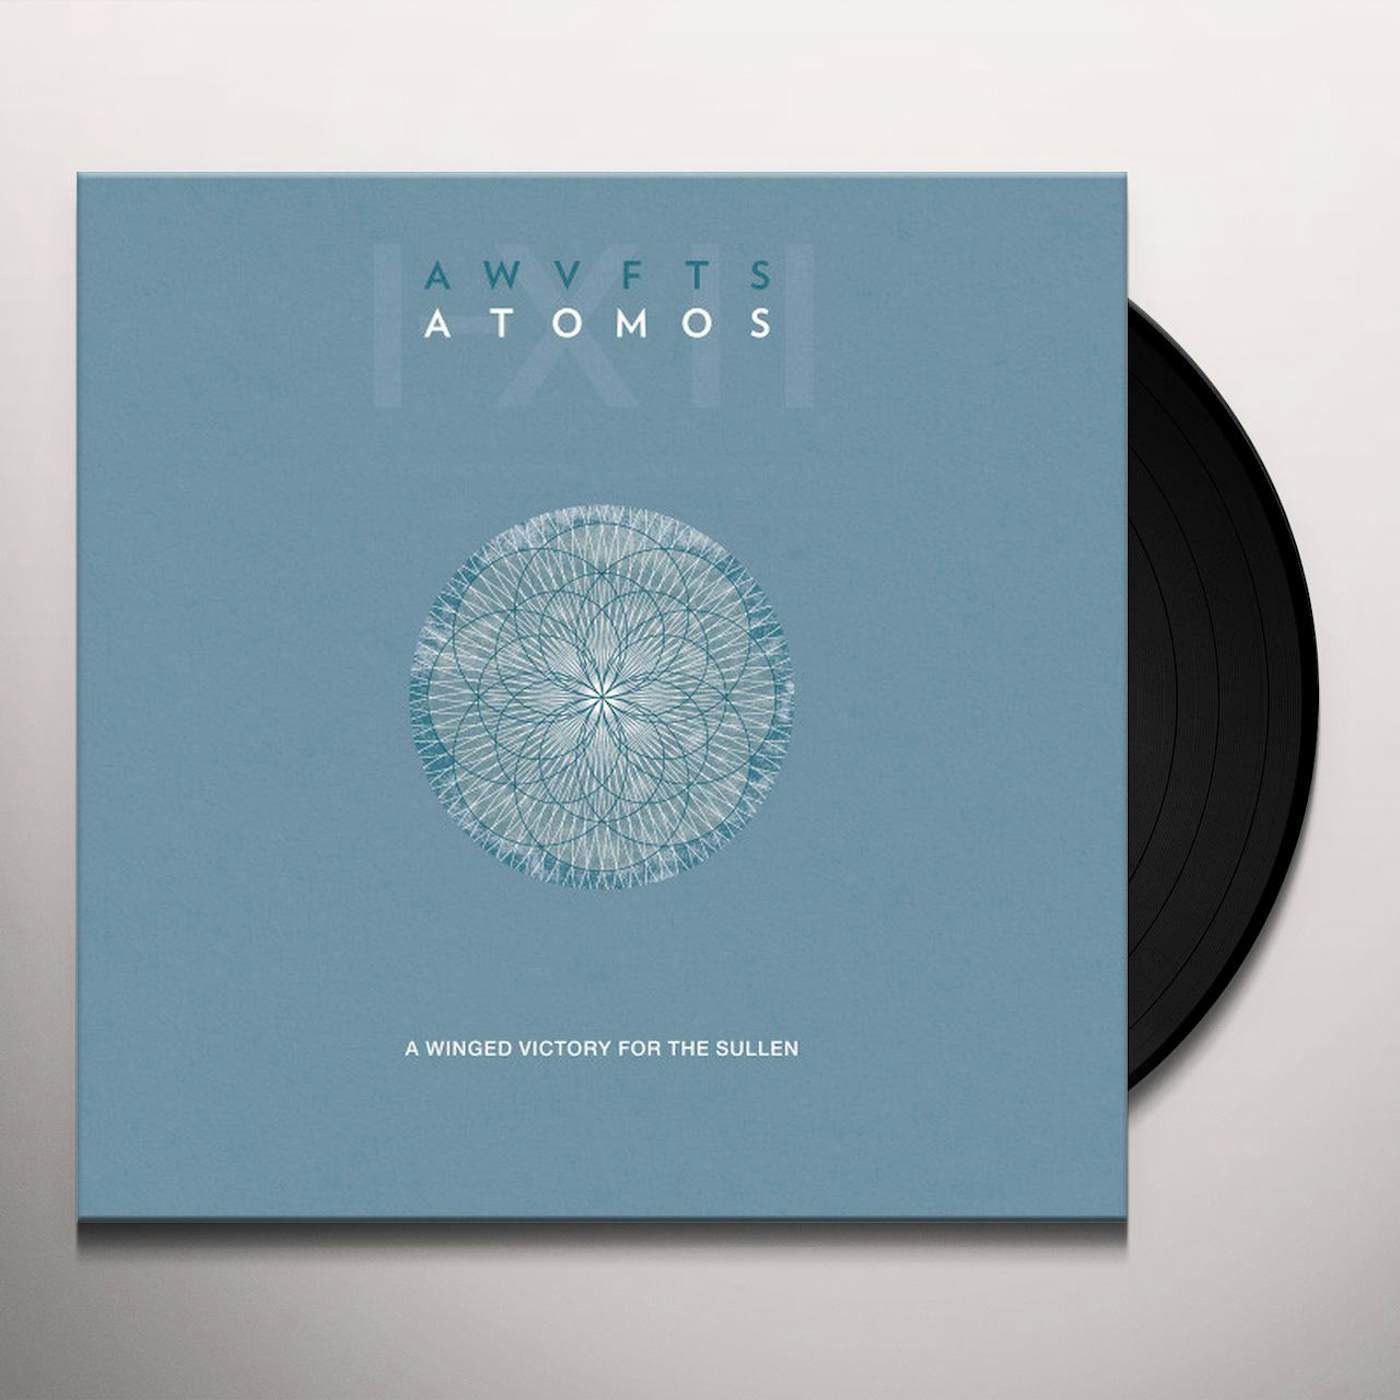 A Winged Victory for the Sullen ATOMOS VII Vinyl Record